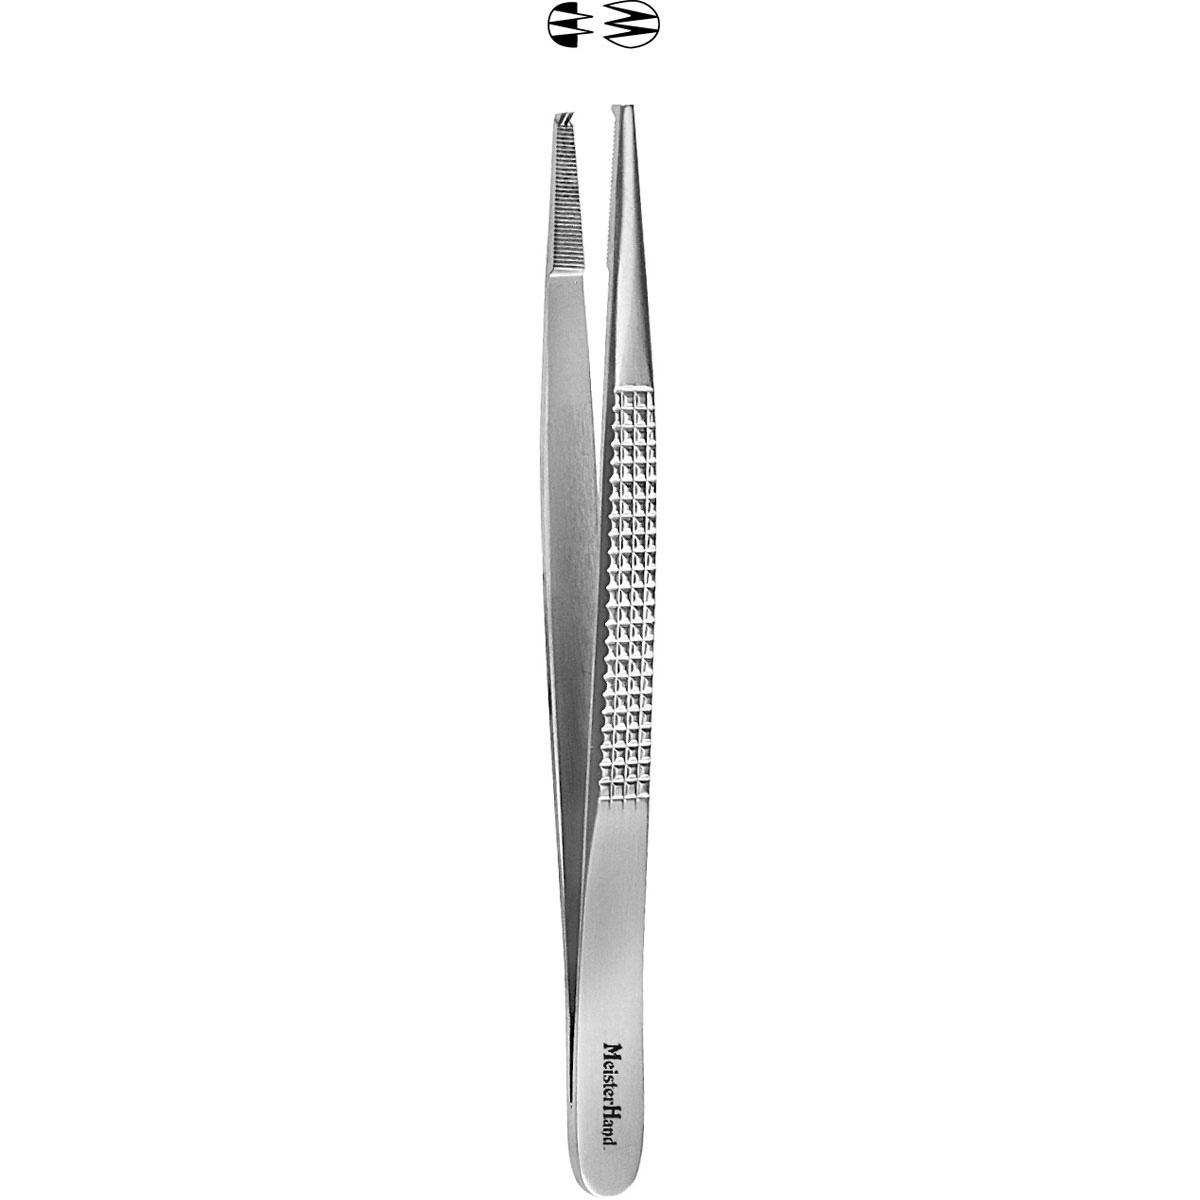 BDeals 6 Dual Tip Dental Probe Pick Wax Carver Tool Stainless Steel